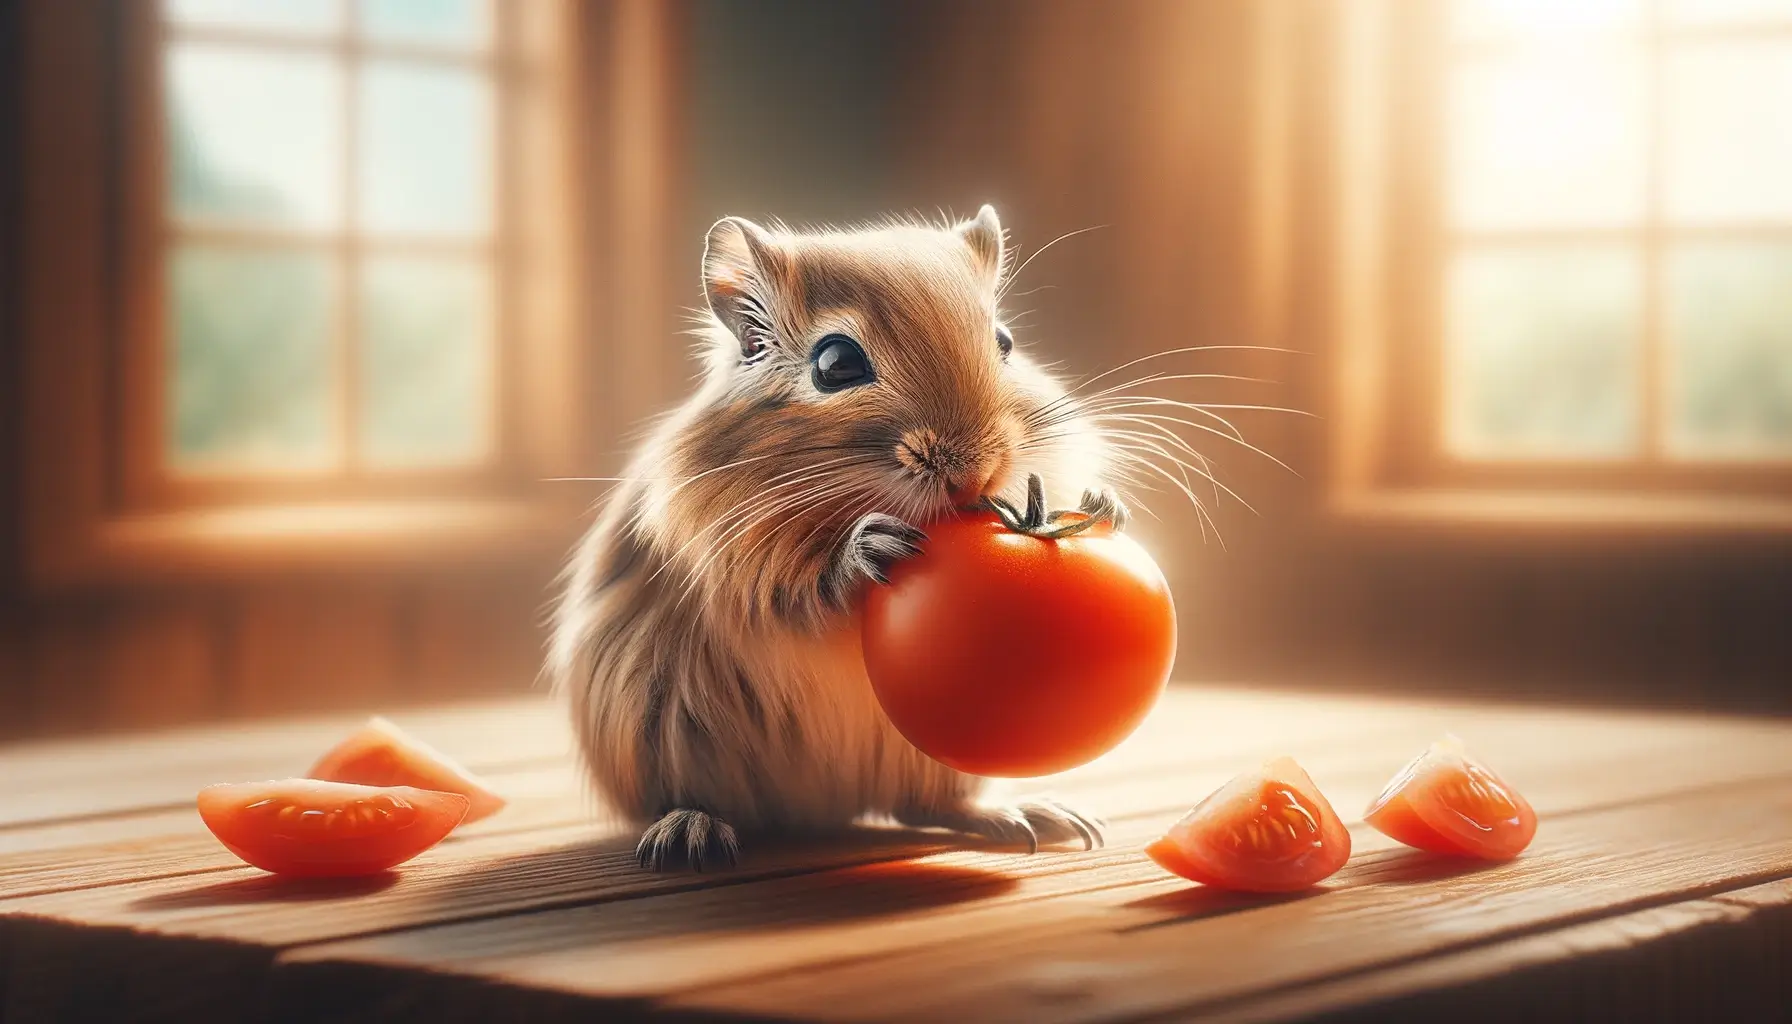 can gerbils eat tomatoes